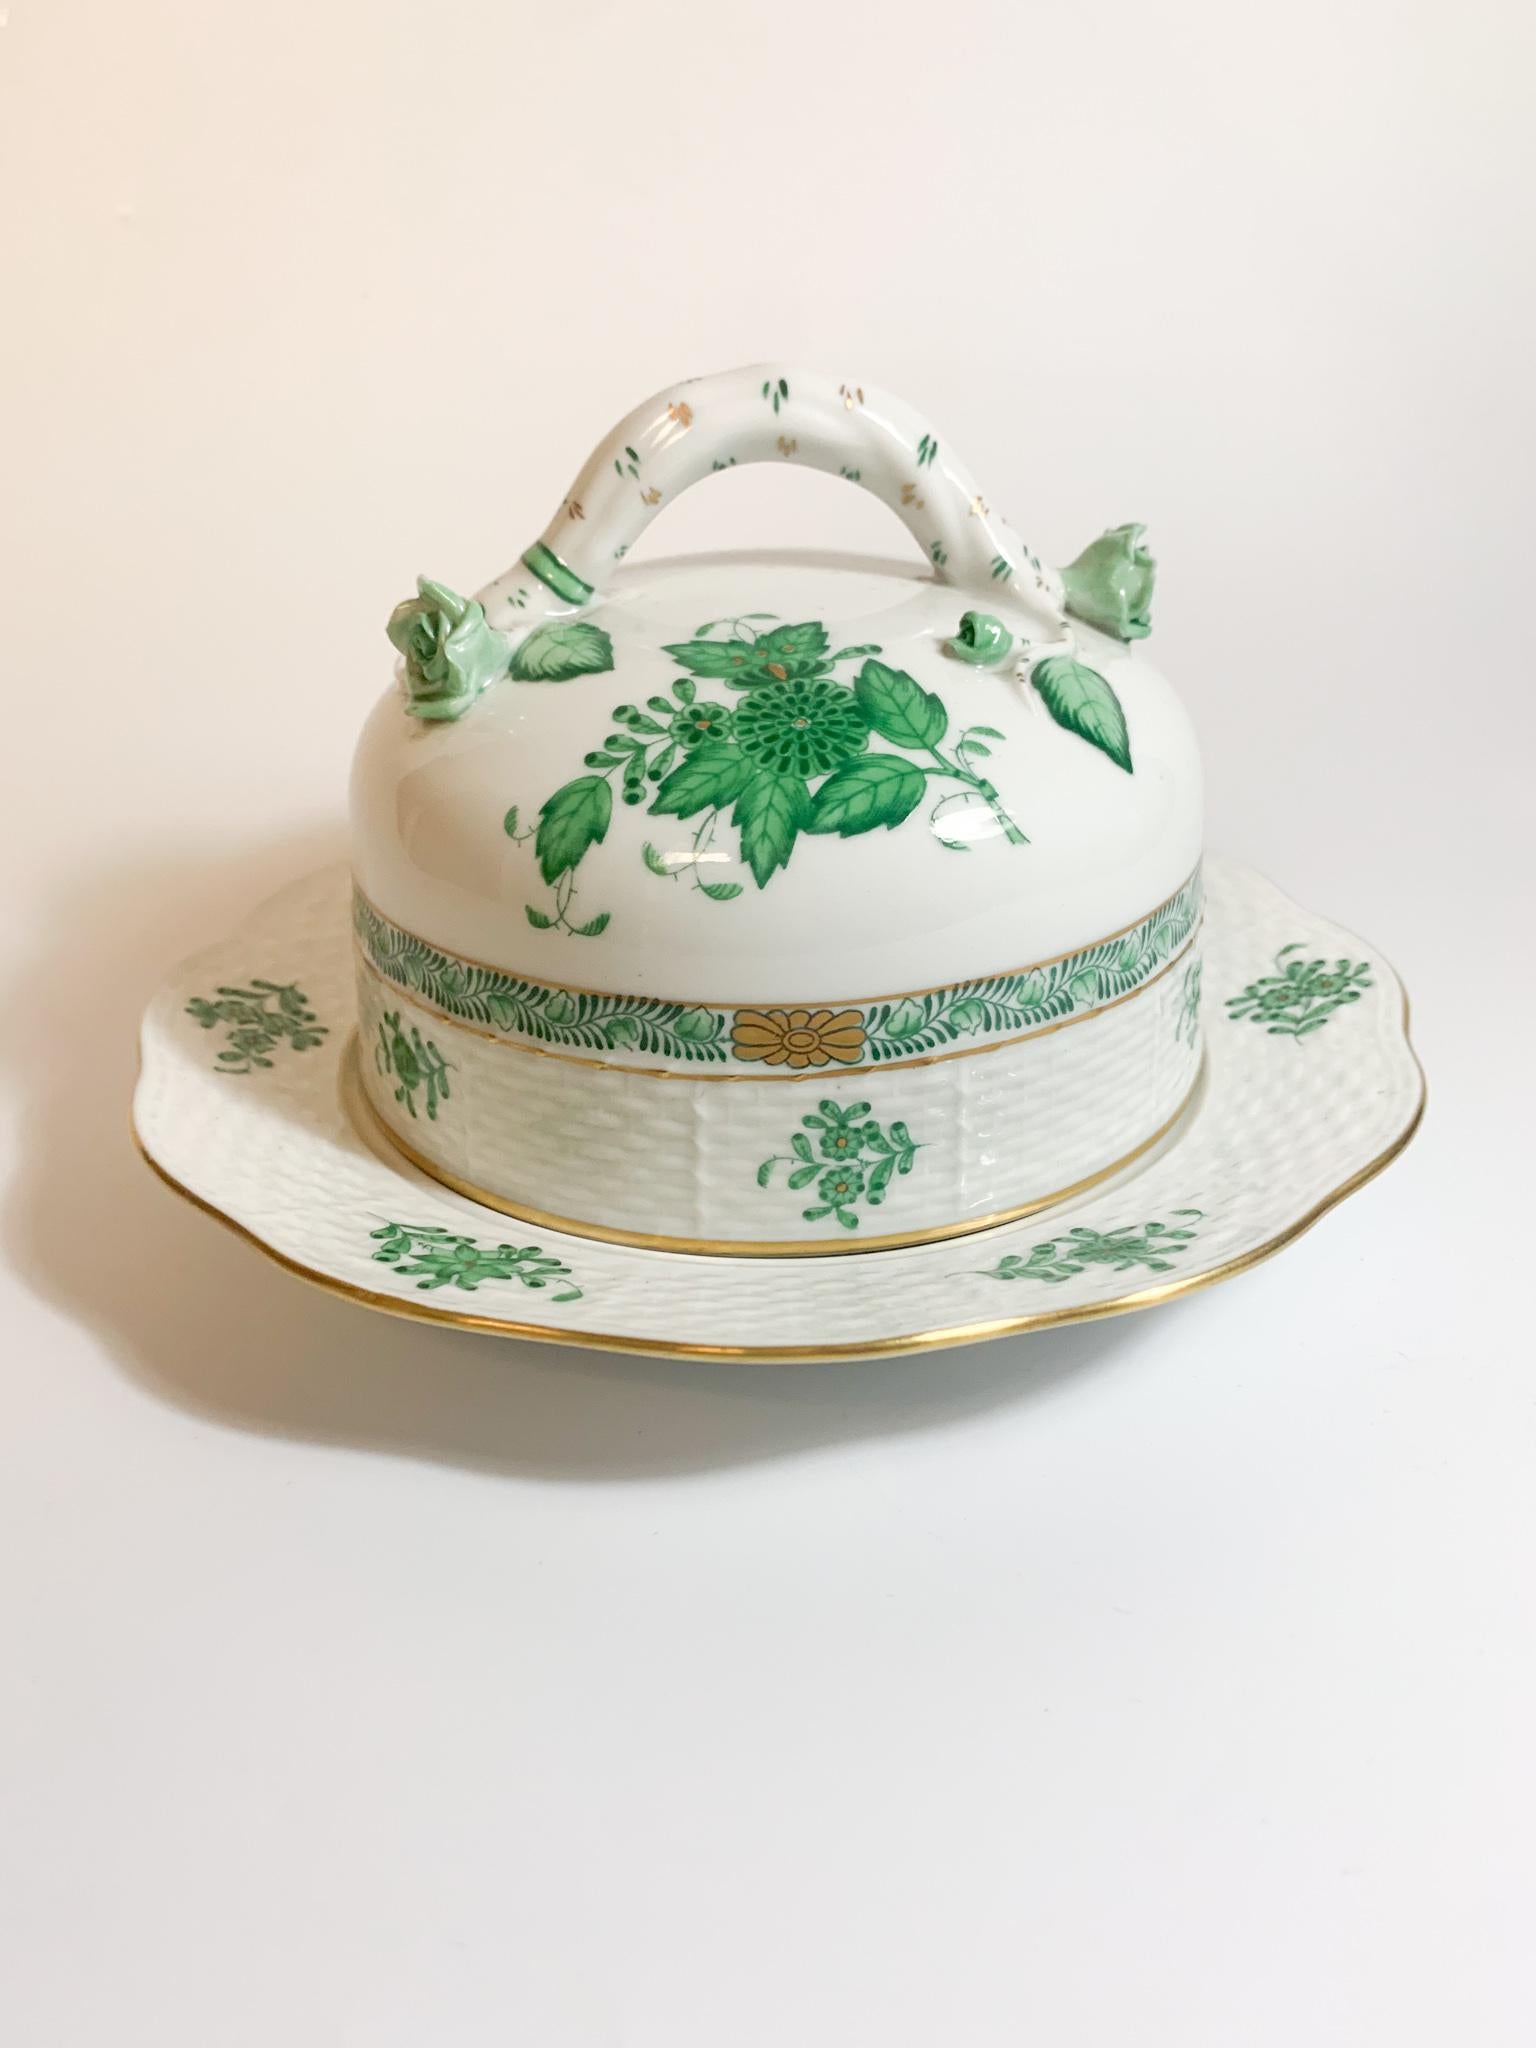 Art Nouveau Herend Porcelain Butter Dish with Ivy Pattern from the 1950s